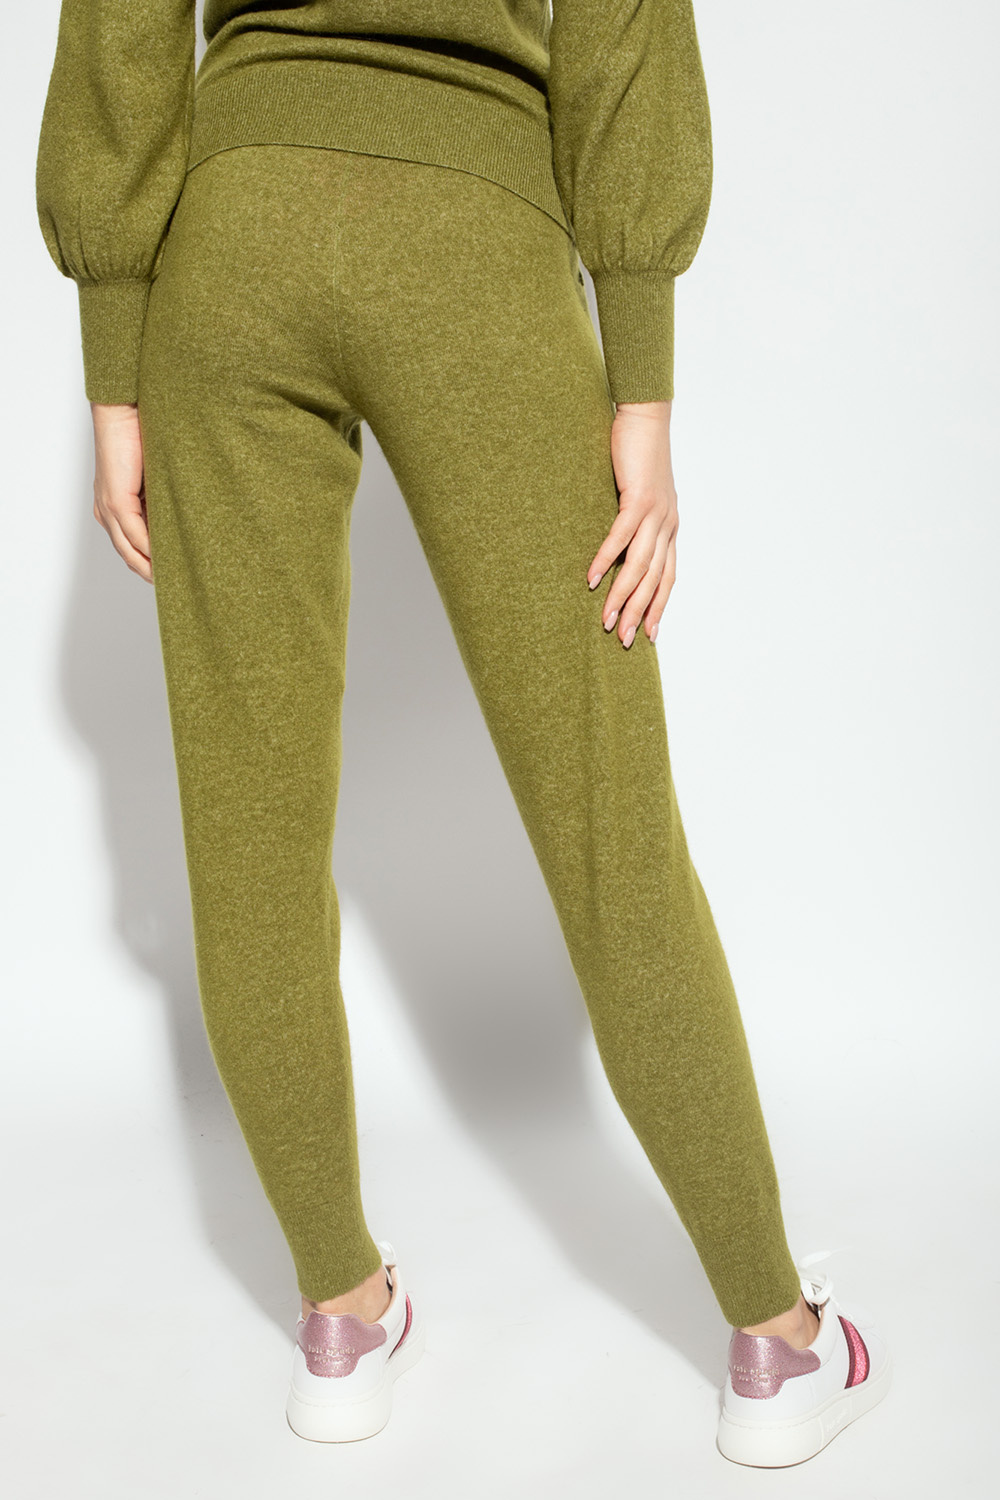 Kate Spade approach trousers with logo